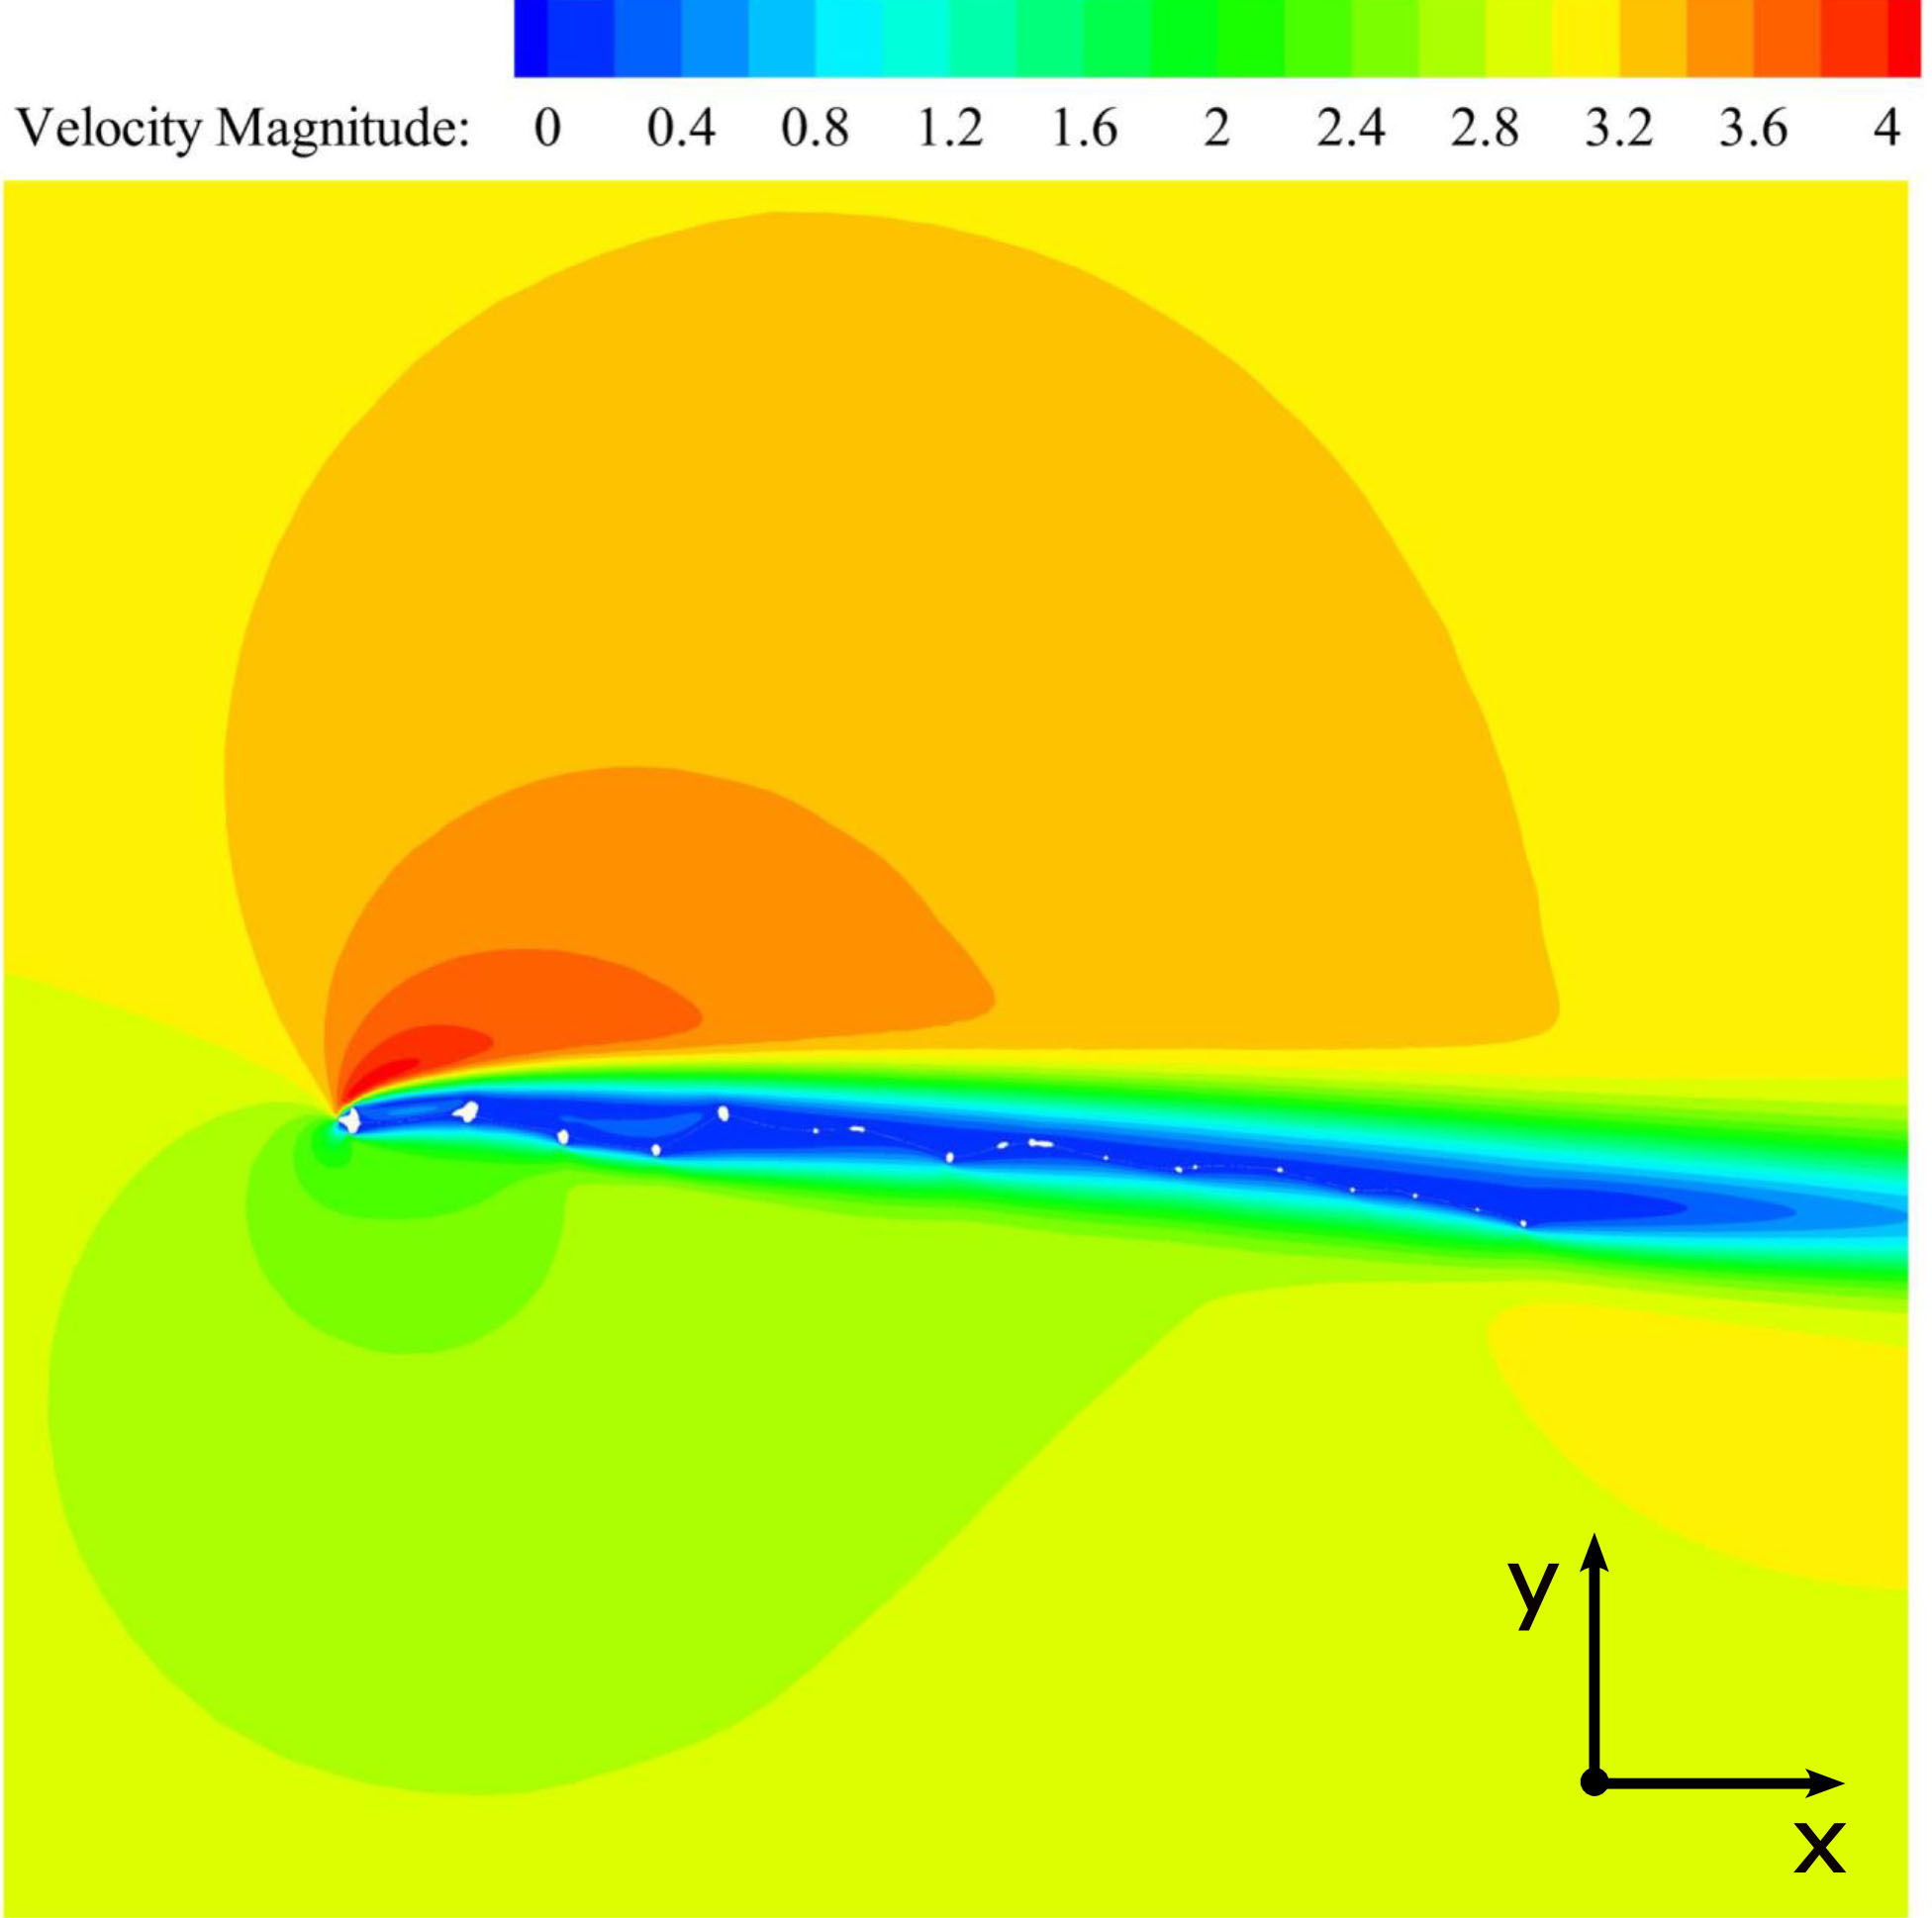 Velocity magnitude distribution of the wing cross-section at 0 mm at an AOA of 5∘. The velocity magnitude is given in m/s. The highest lift-to-drag ratio occurred at this location.